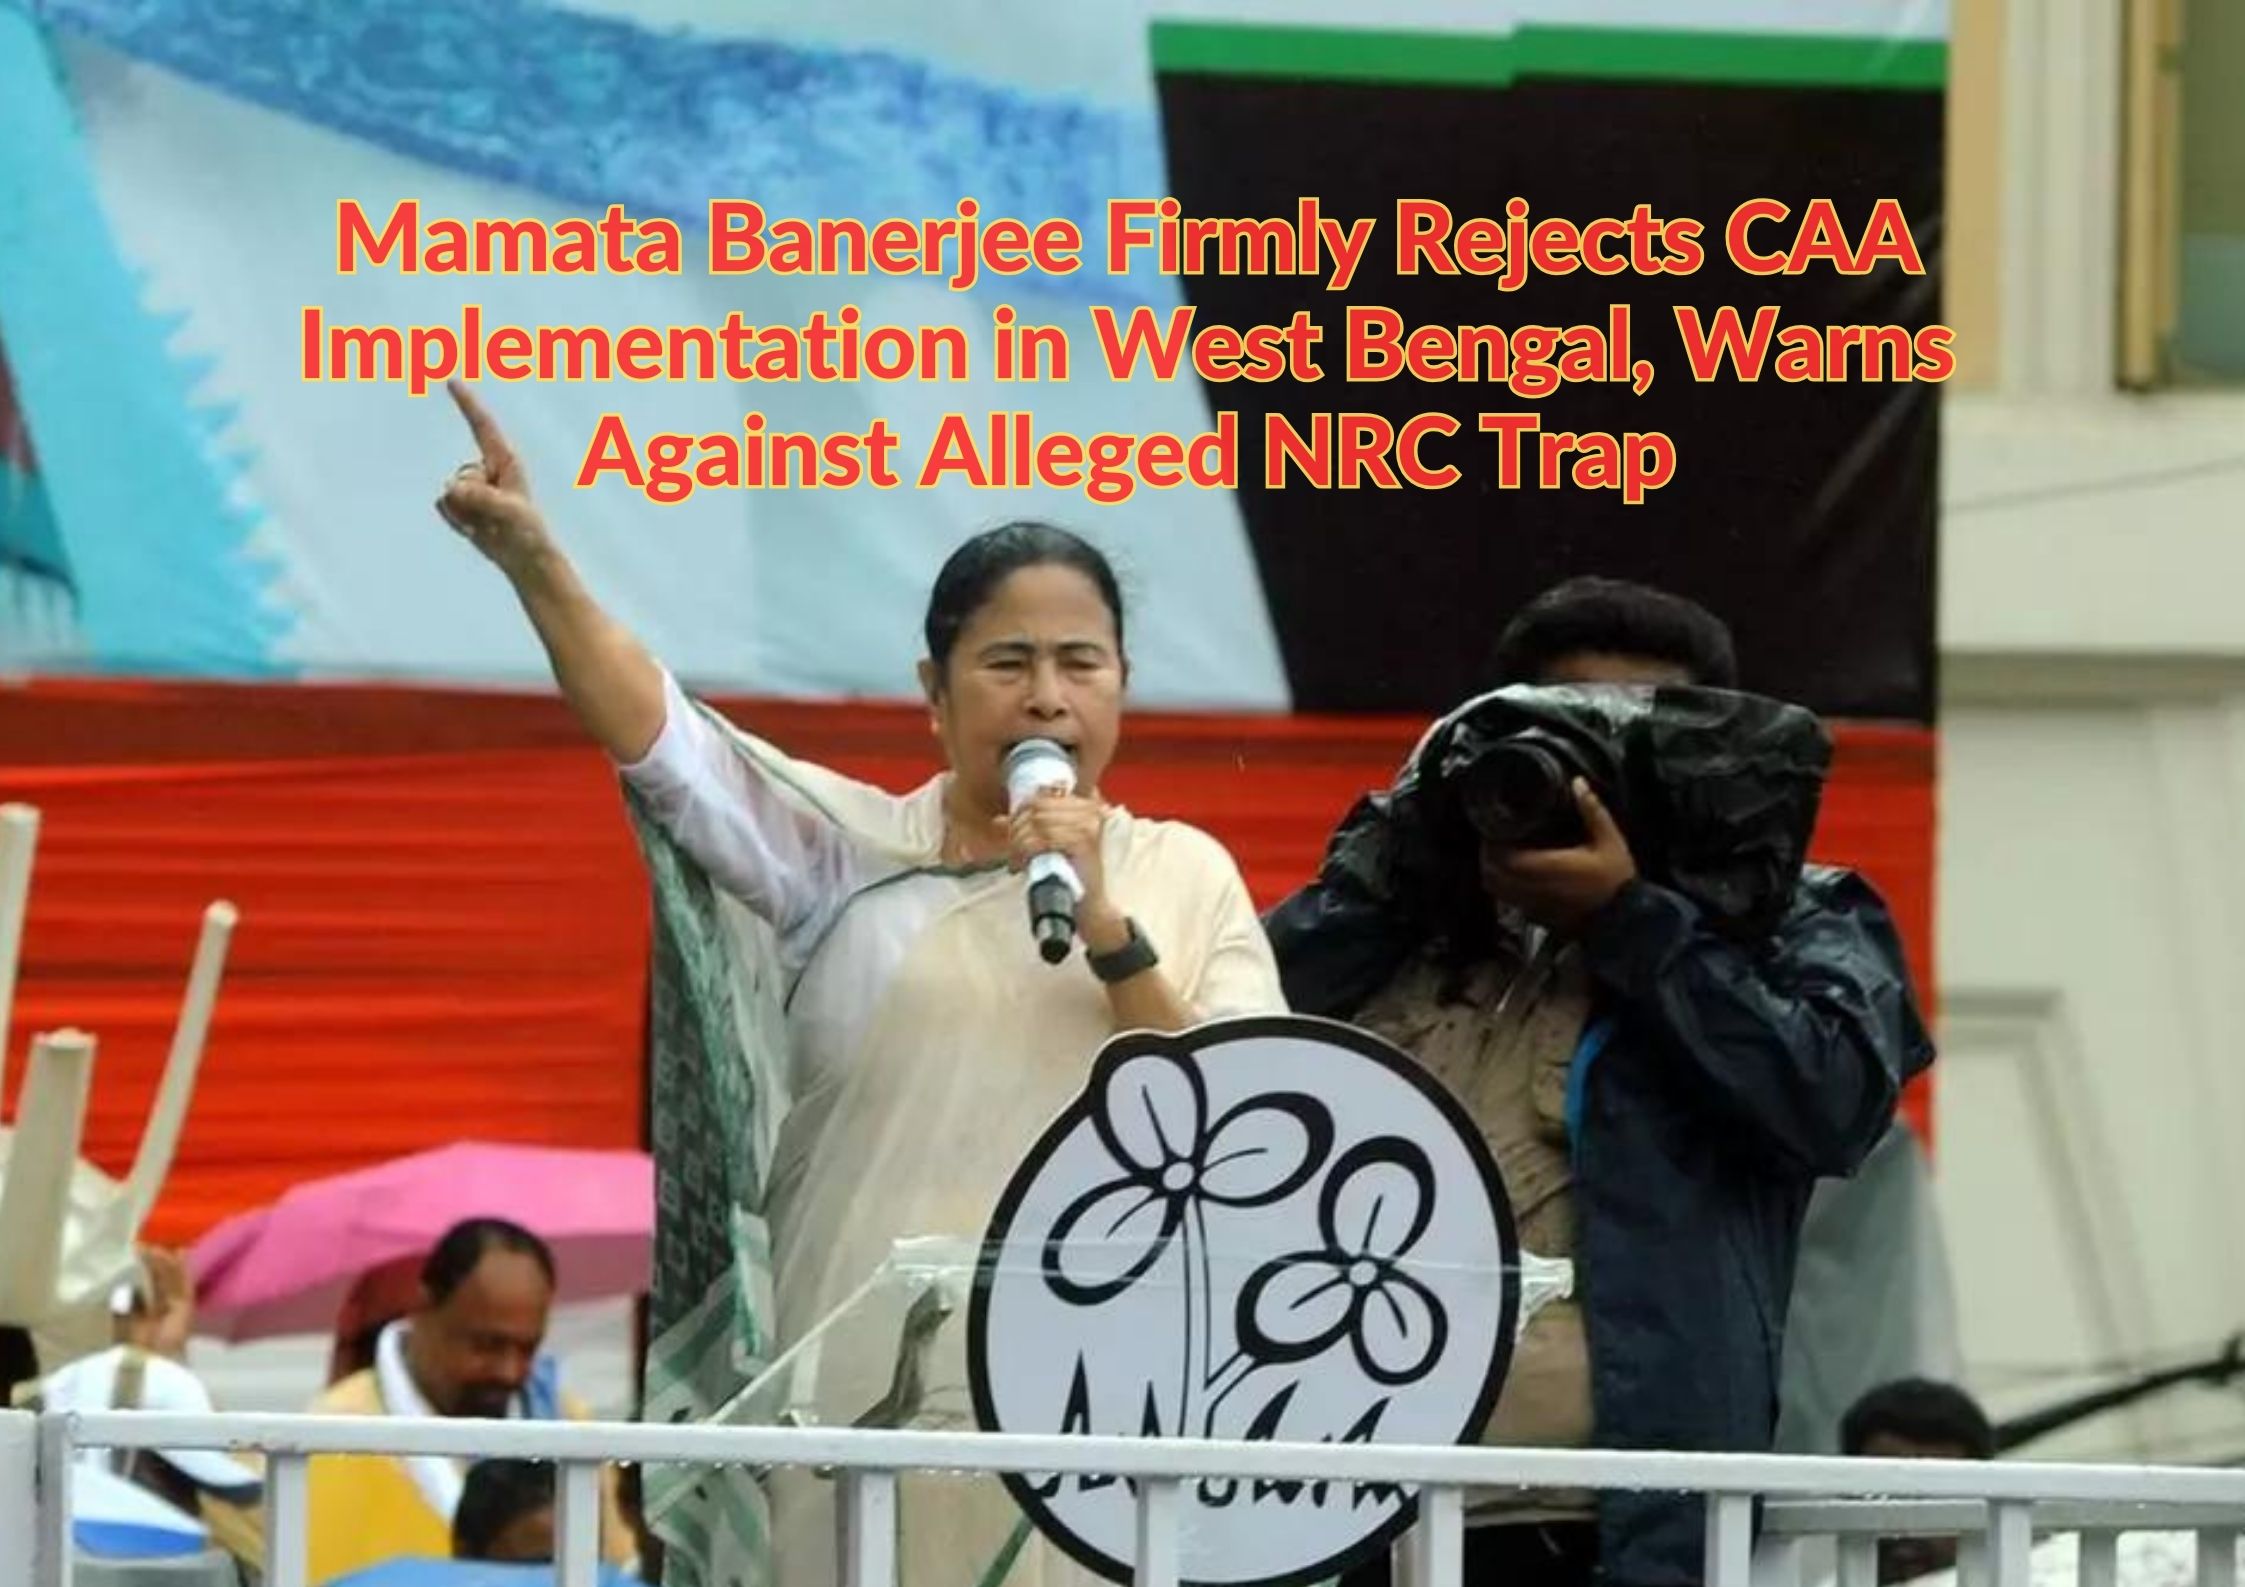 Mamata Banerjee Firmly Rejects CAA Implementation in West Bengal, Warns Against Alleged NRC Trap